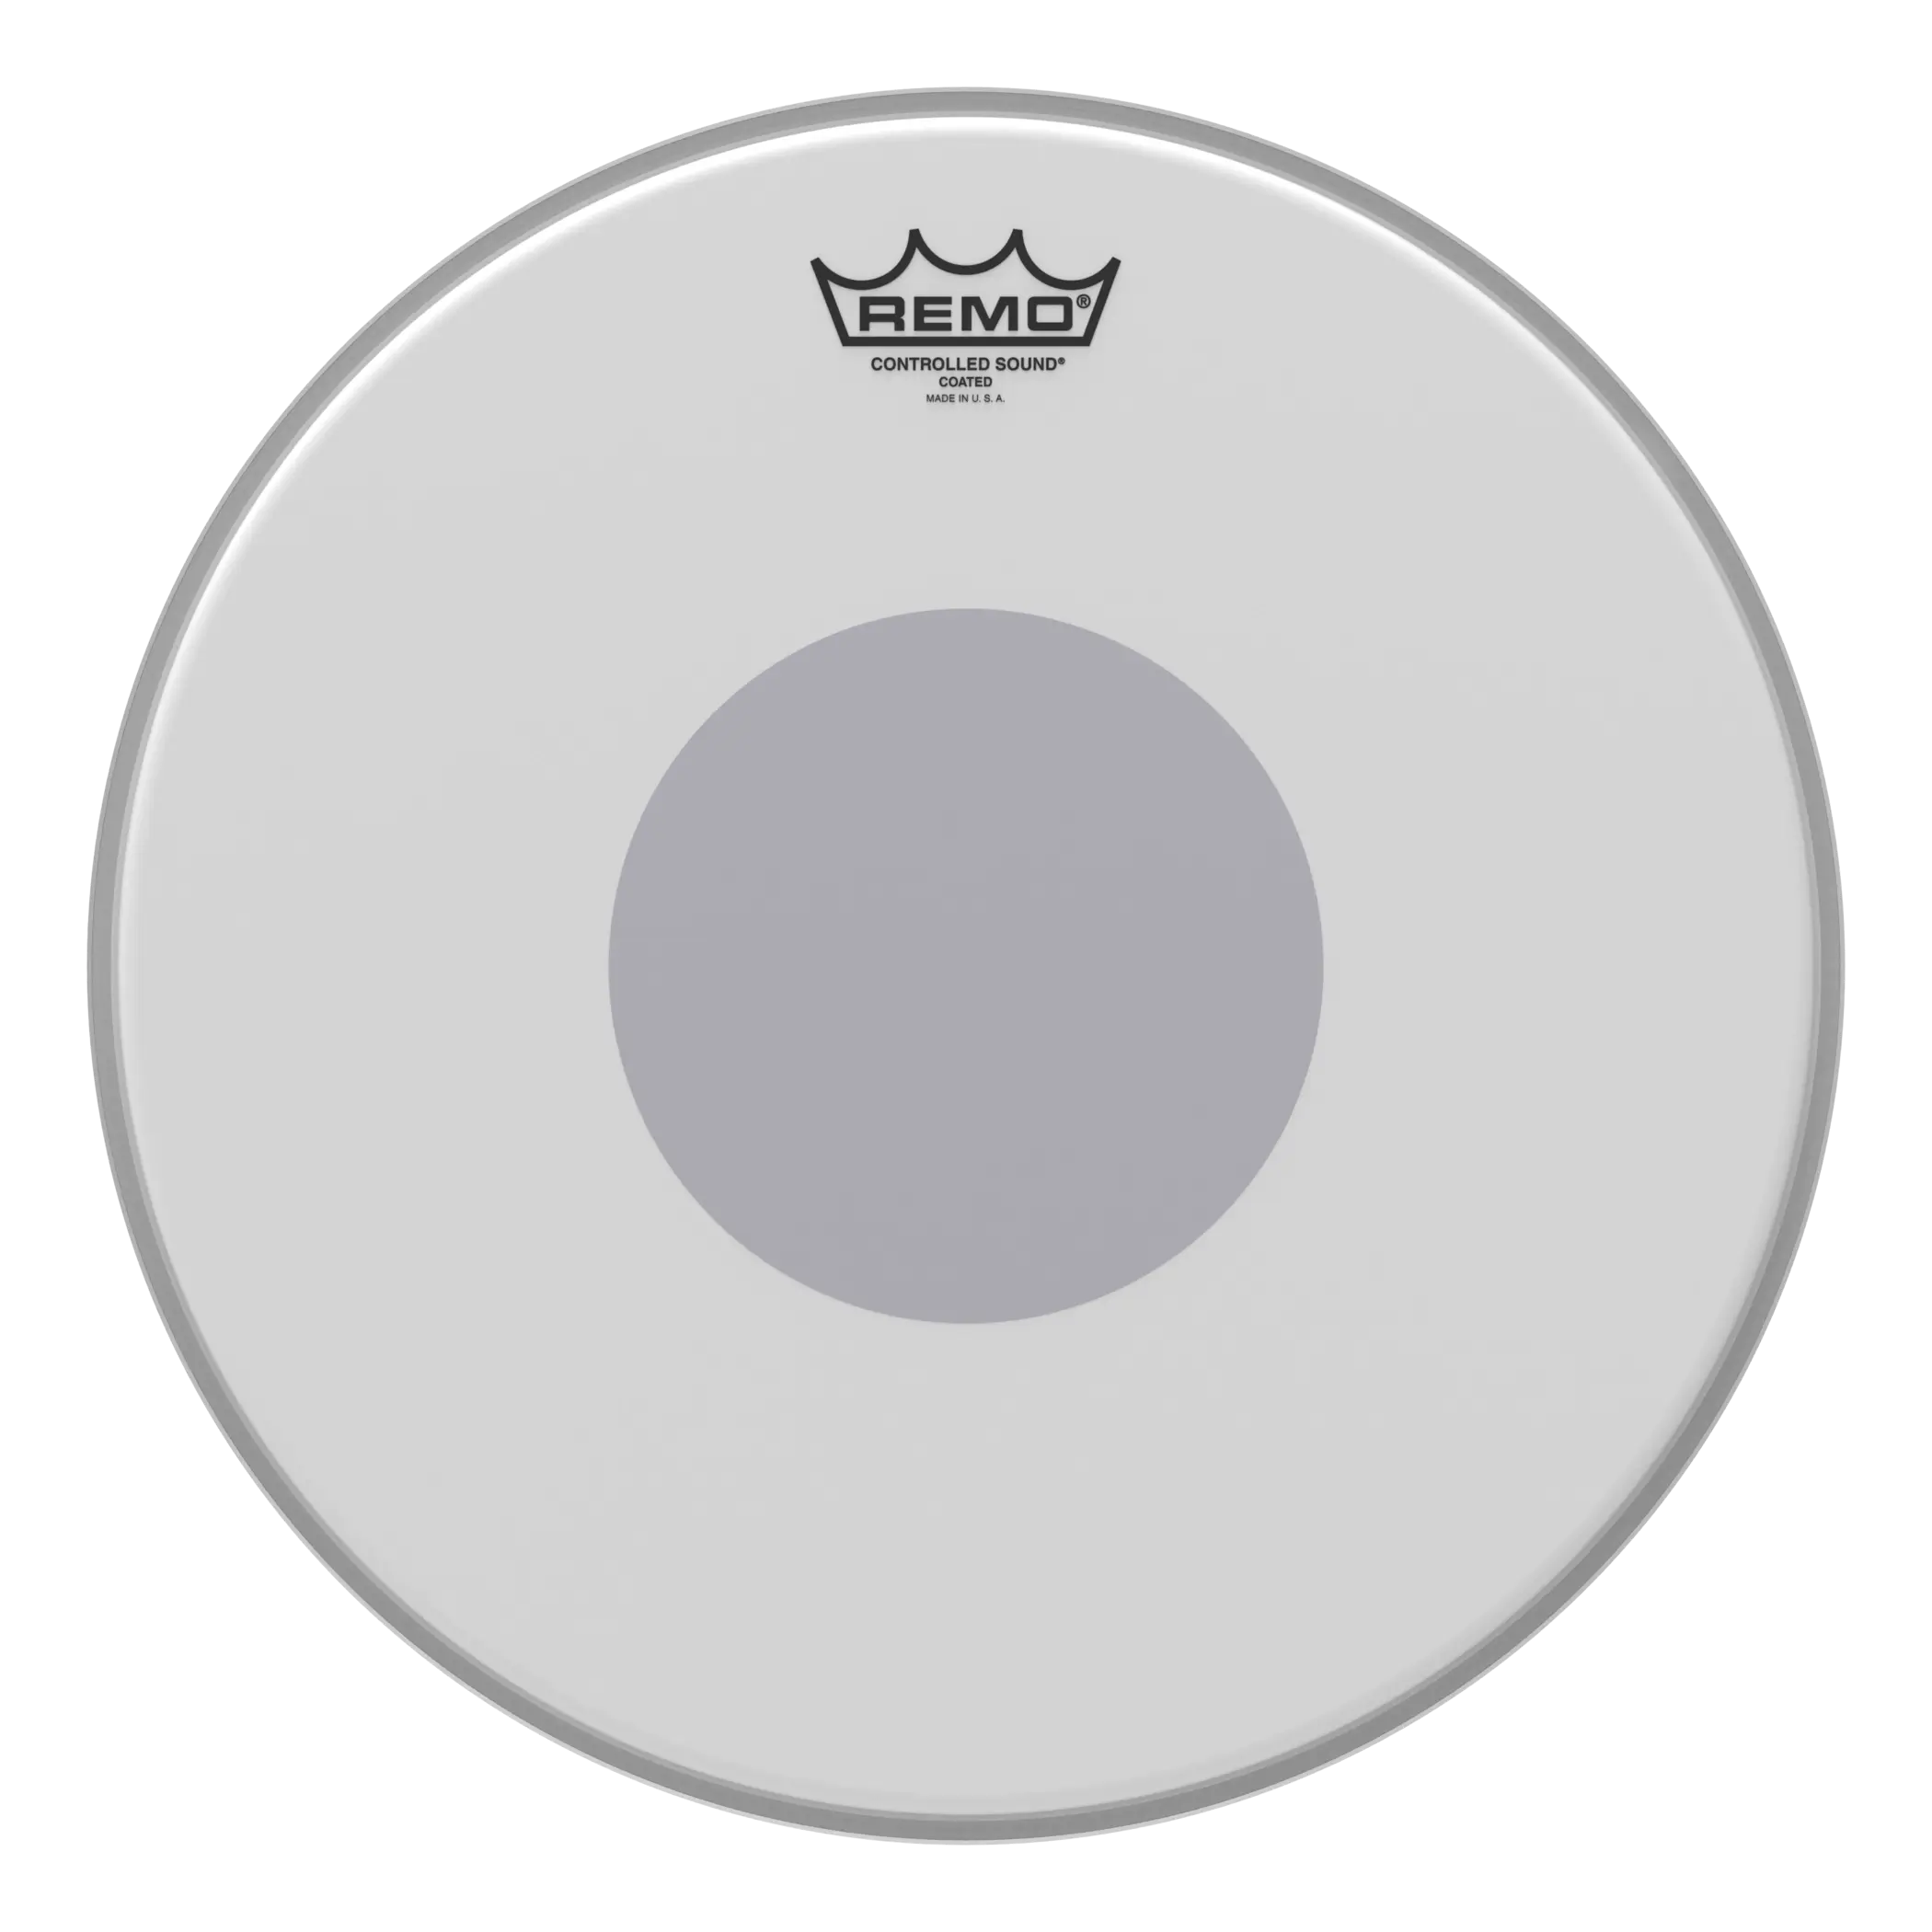 Remo 14" Controlled Sound Coated Black Dot Drumhead